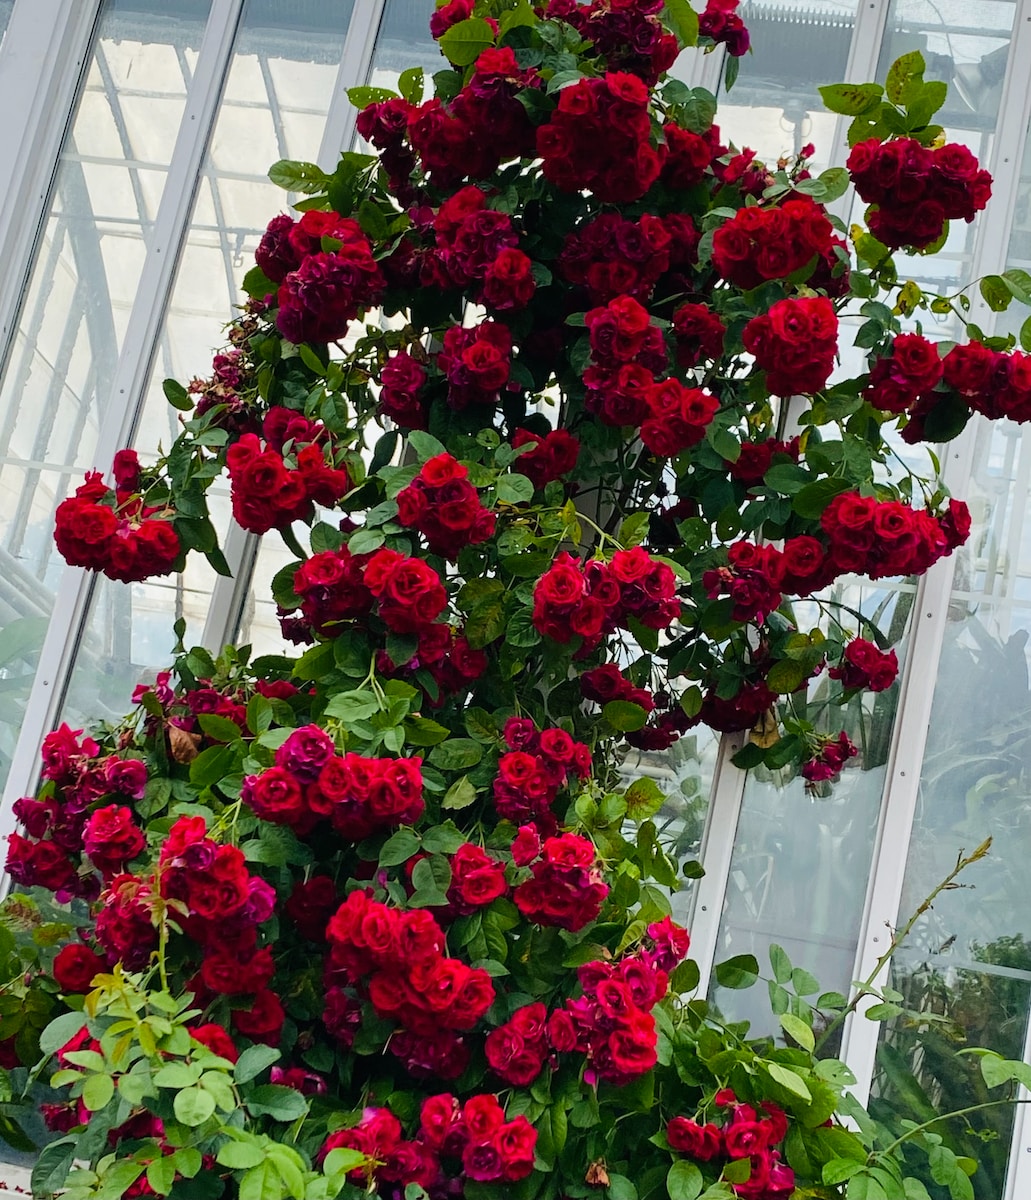 a large bush of red roses growing in a greenhouse